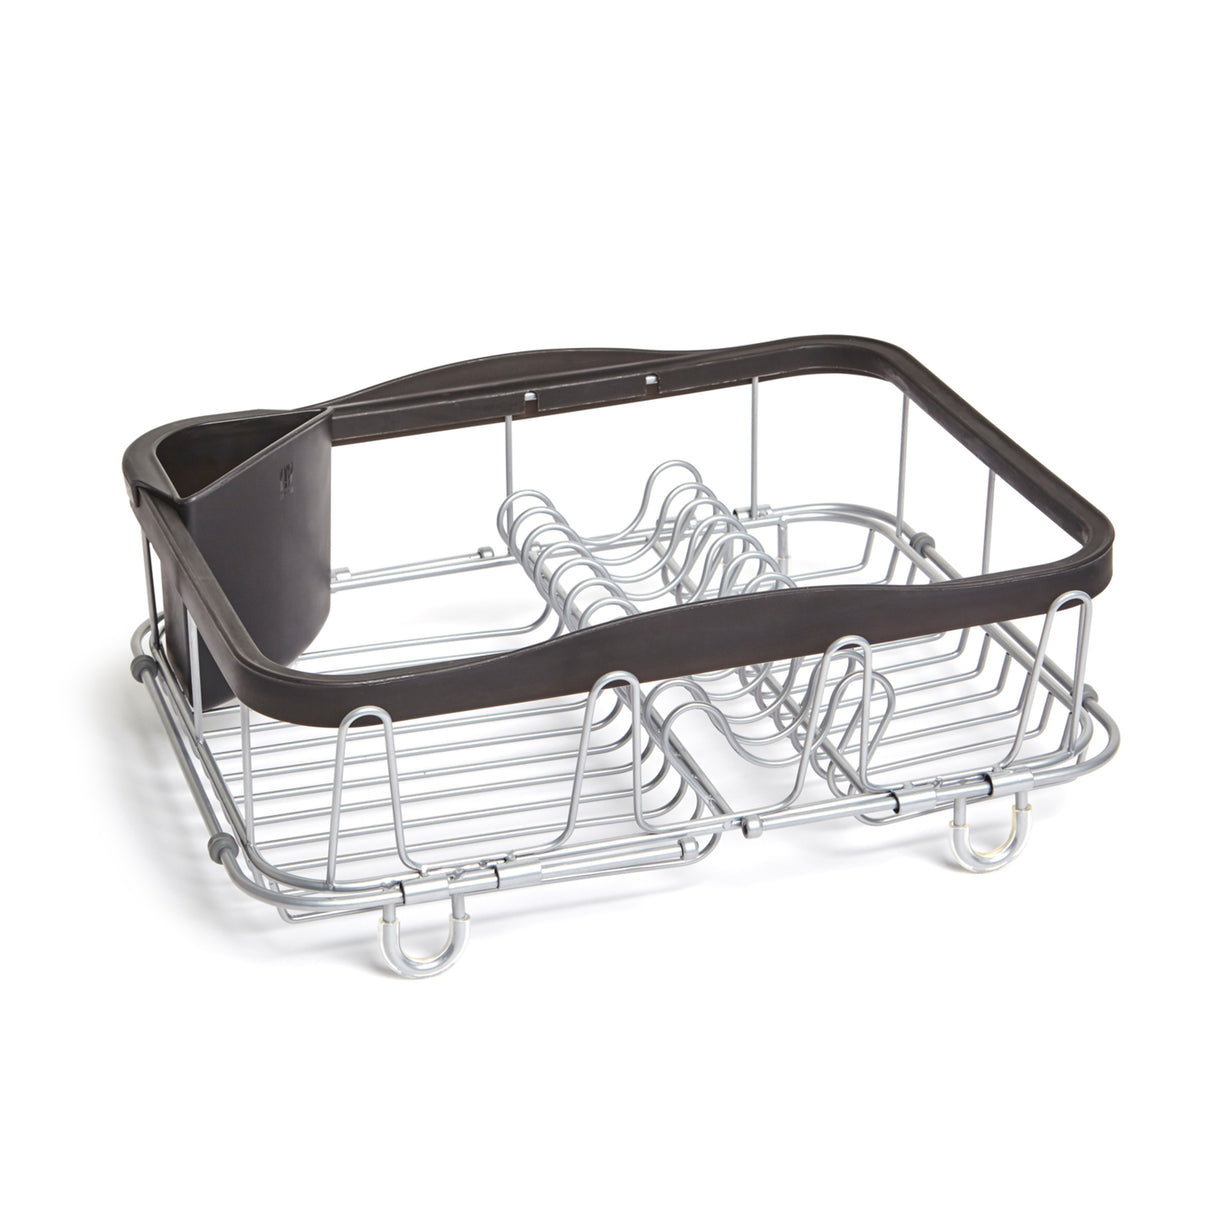 Heavy-Duty, Multi-Function commercial dish drainer 